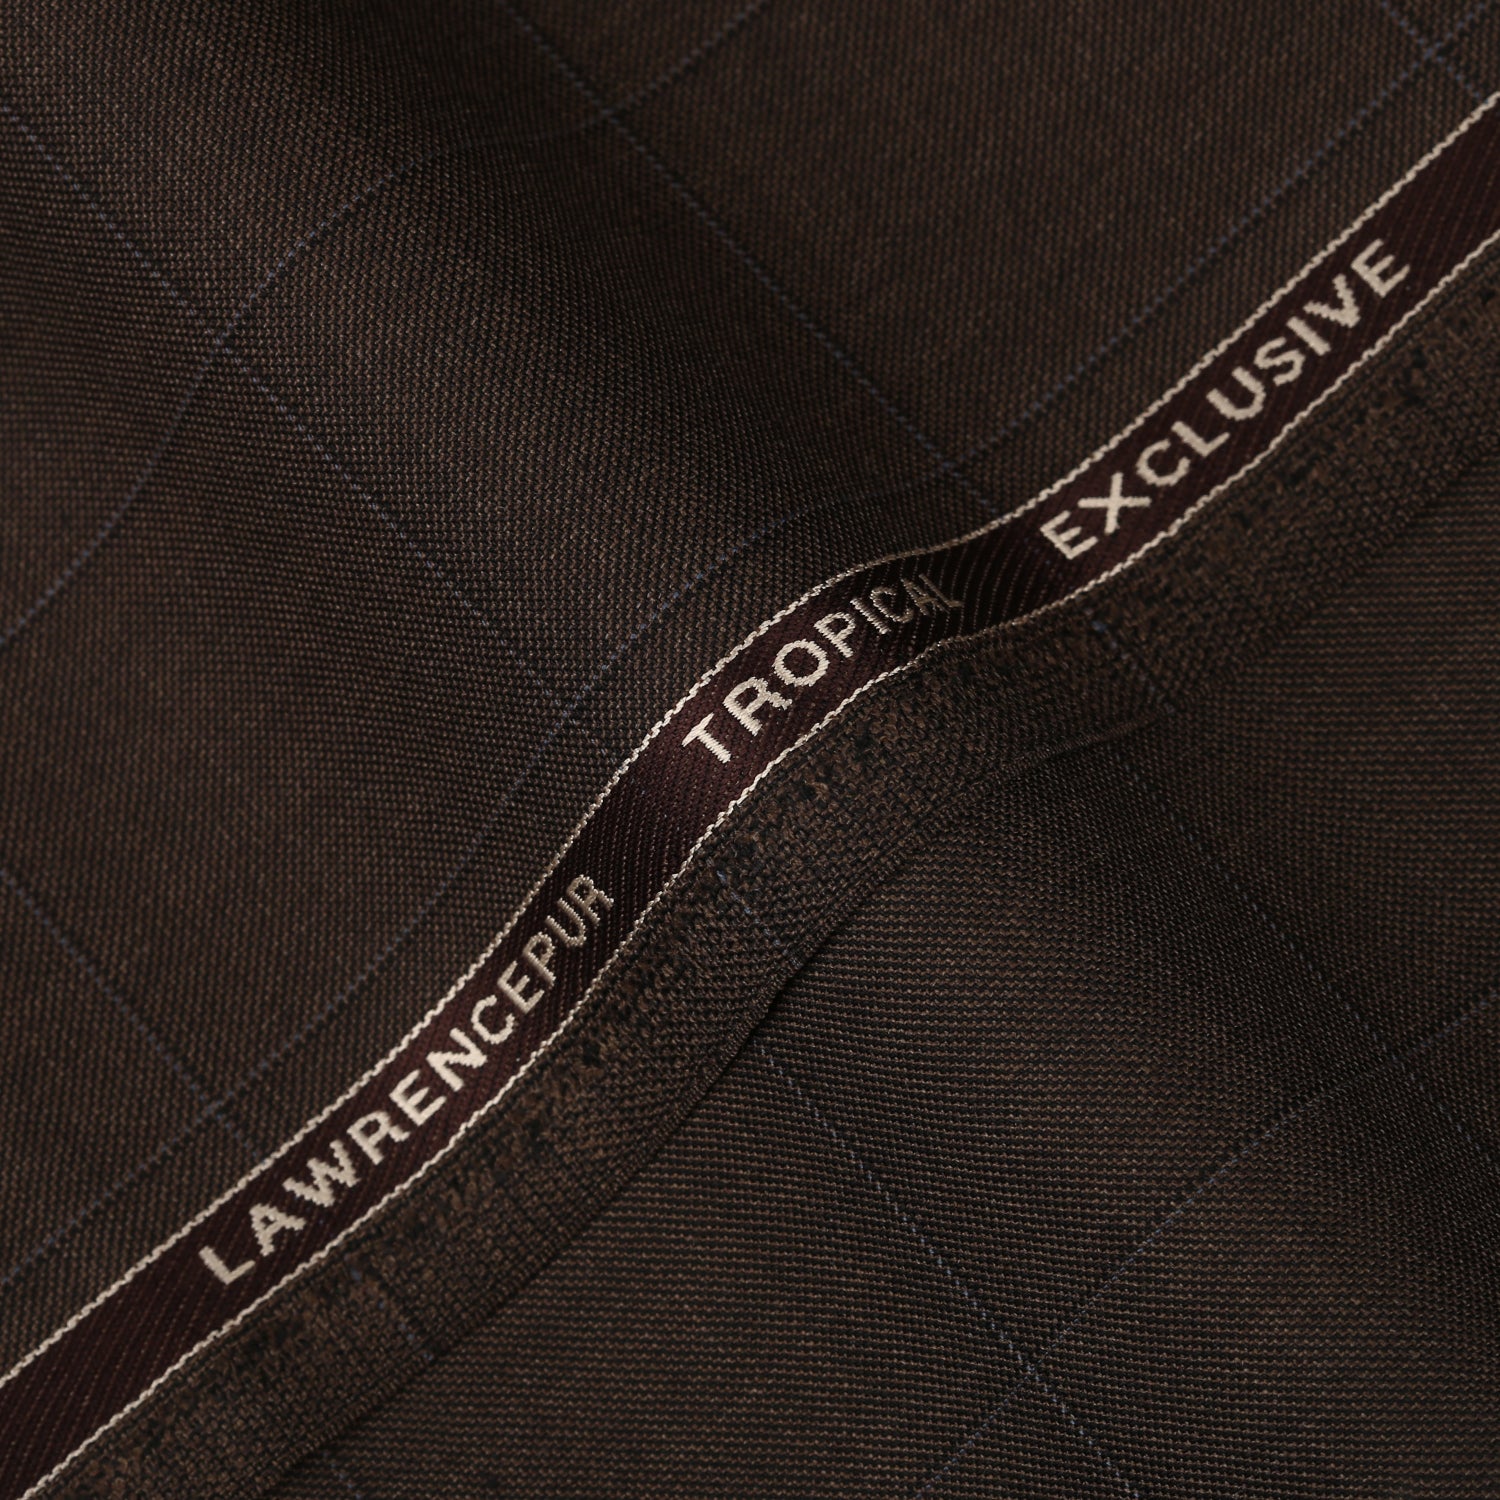 Windowpane Checks-Umber Brown, Wool Blend, Tropical Exclusive Suiting Fabric